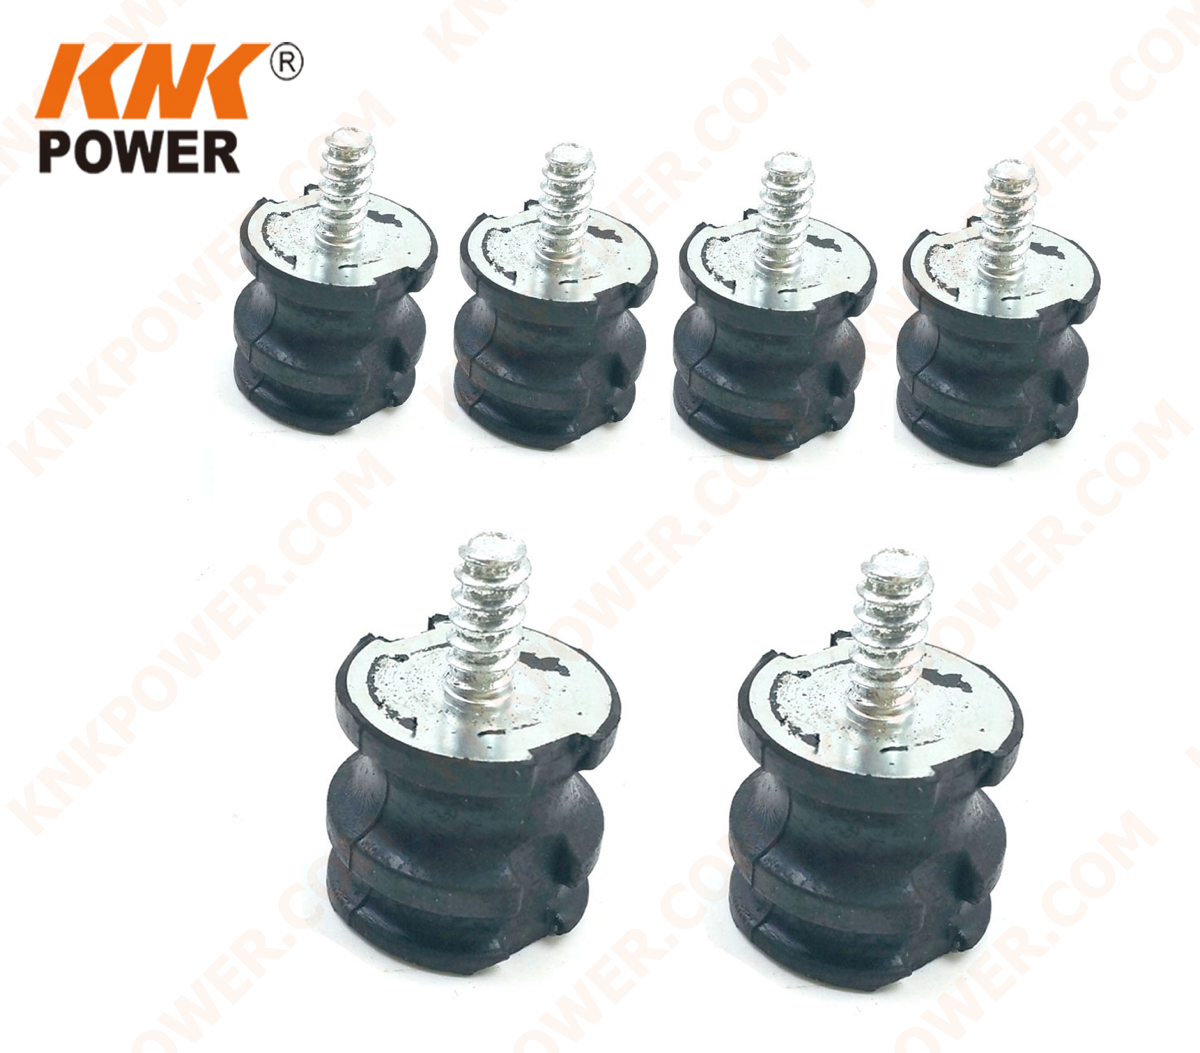 knkpower product image 19224 